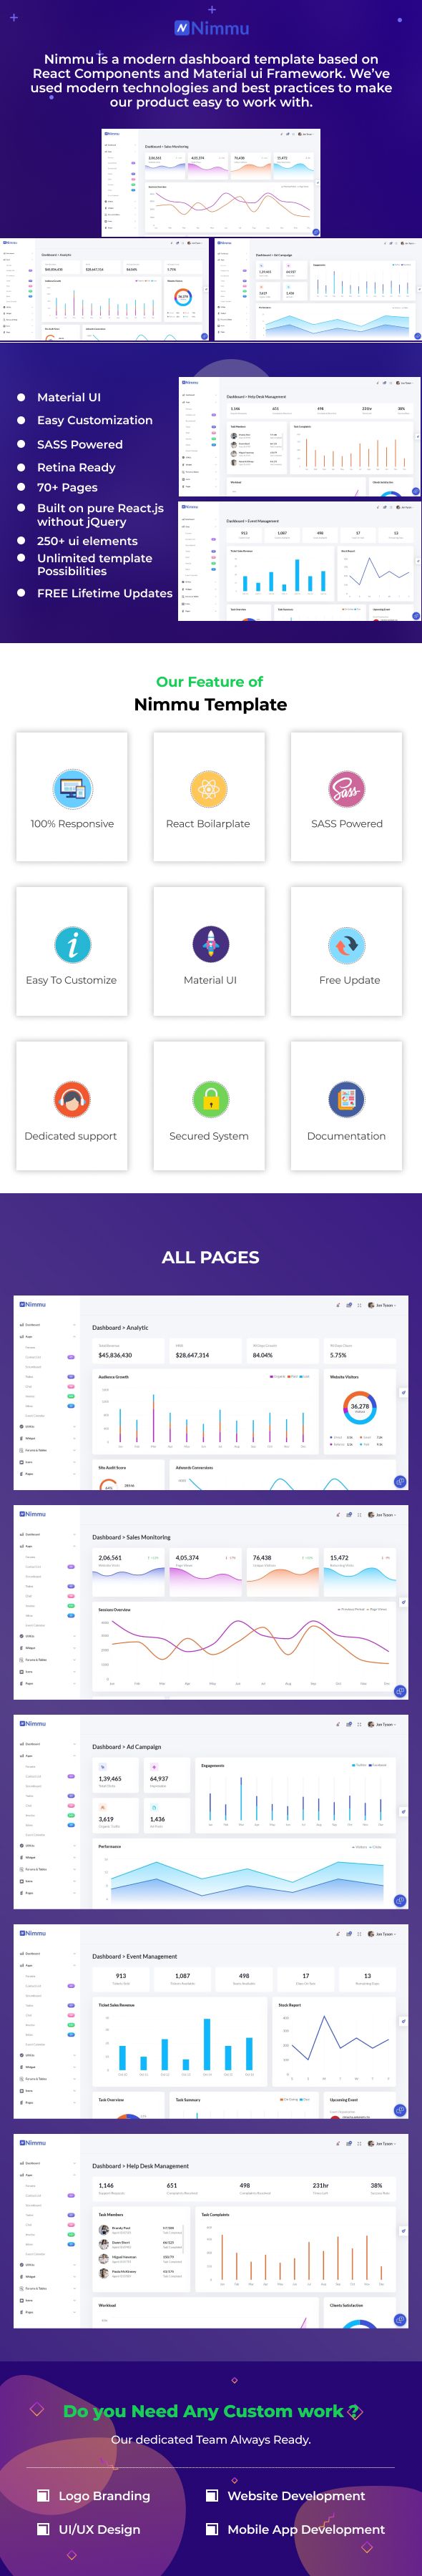 nimmo admin template preview1